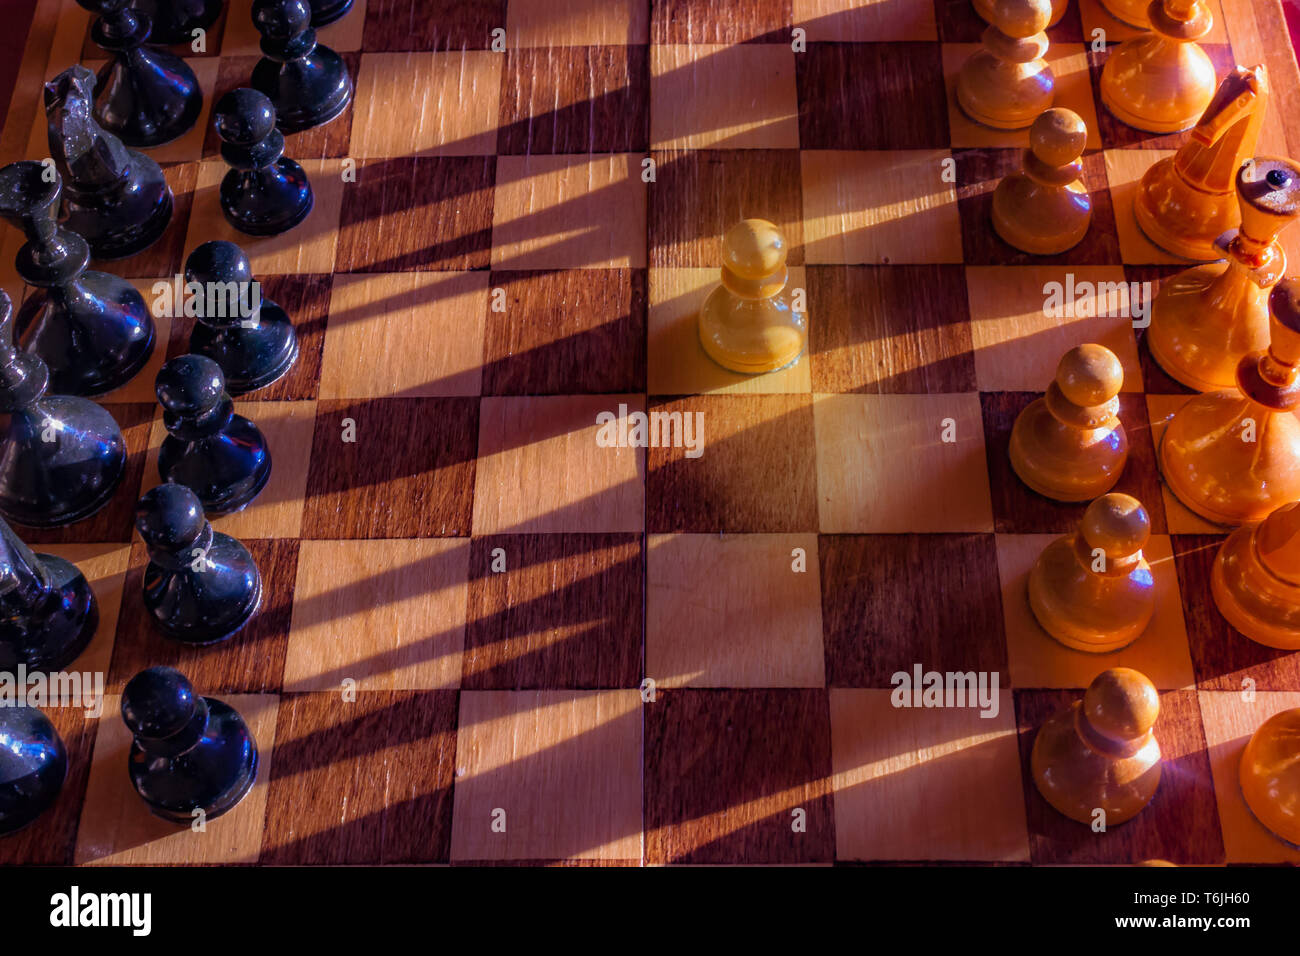 One pawn staying against a full set of black chess pieces. Closeup of chessboard with wooden pieces on table in sunlight, a game of lights. Business Stock Photo